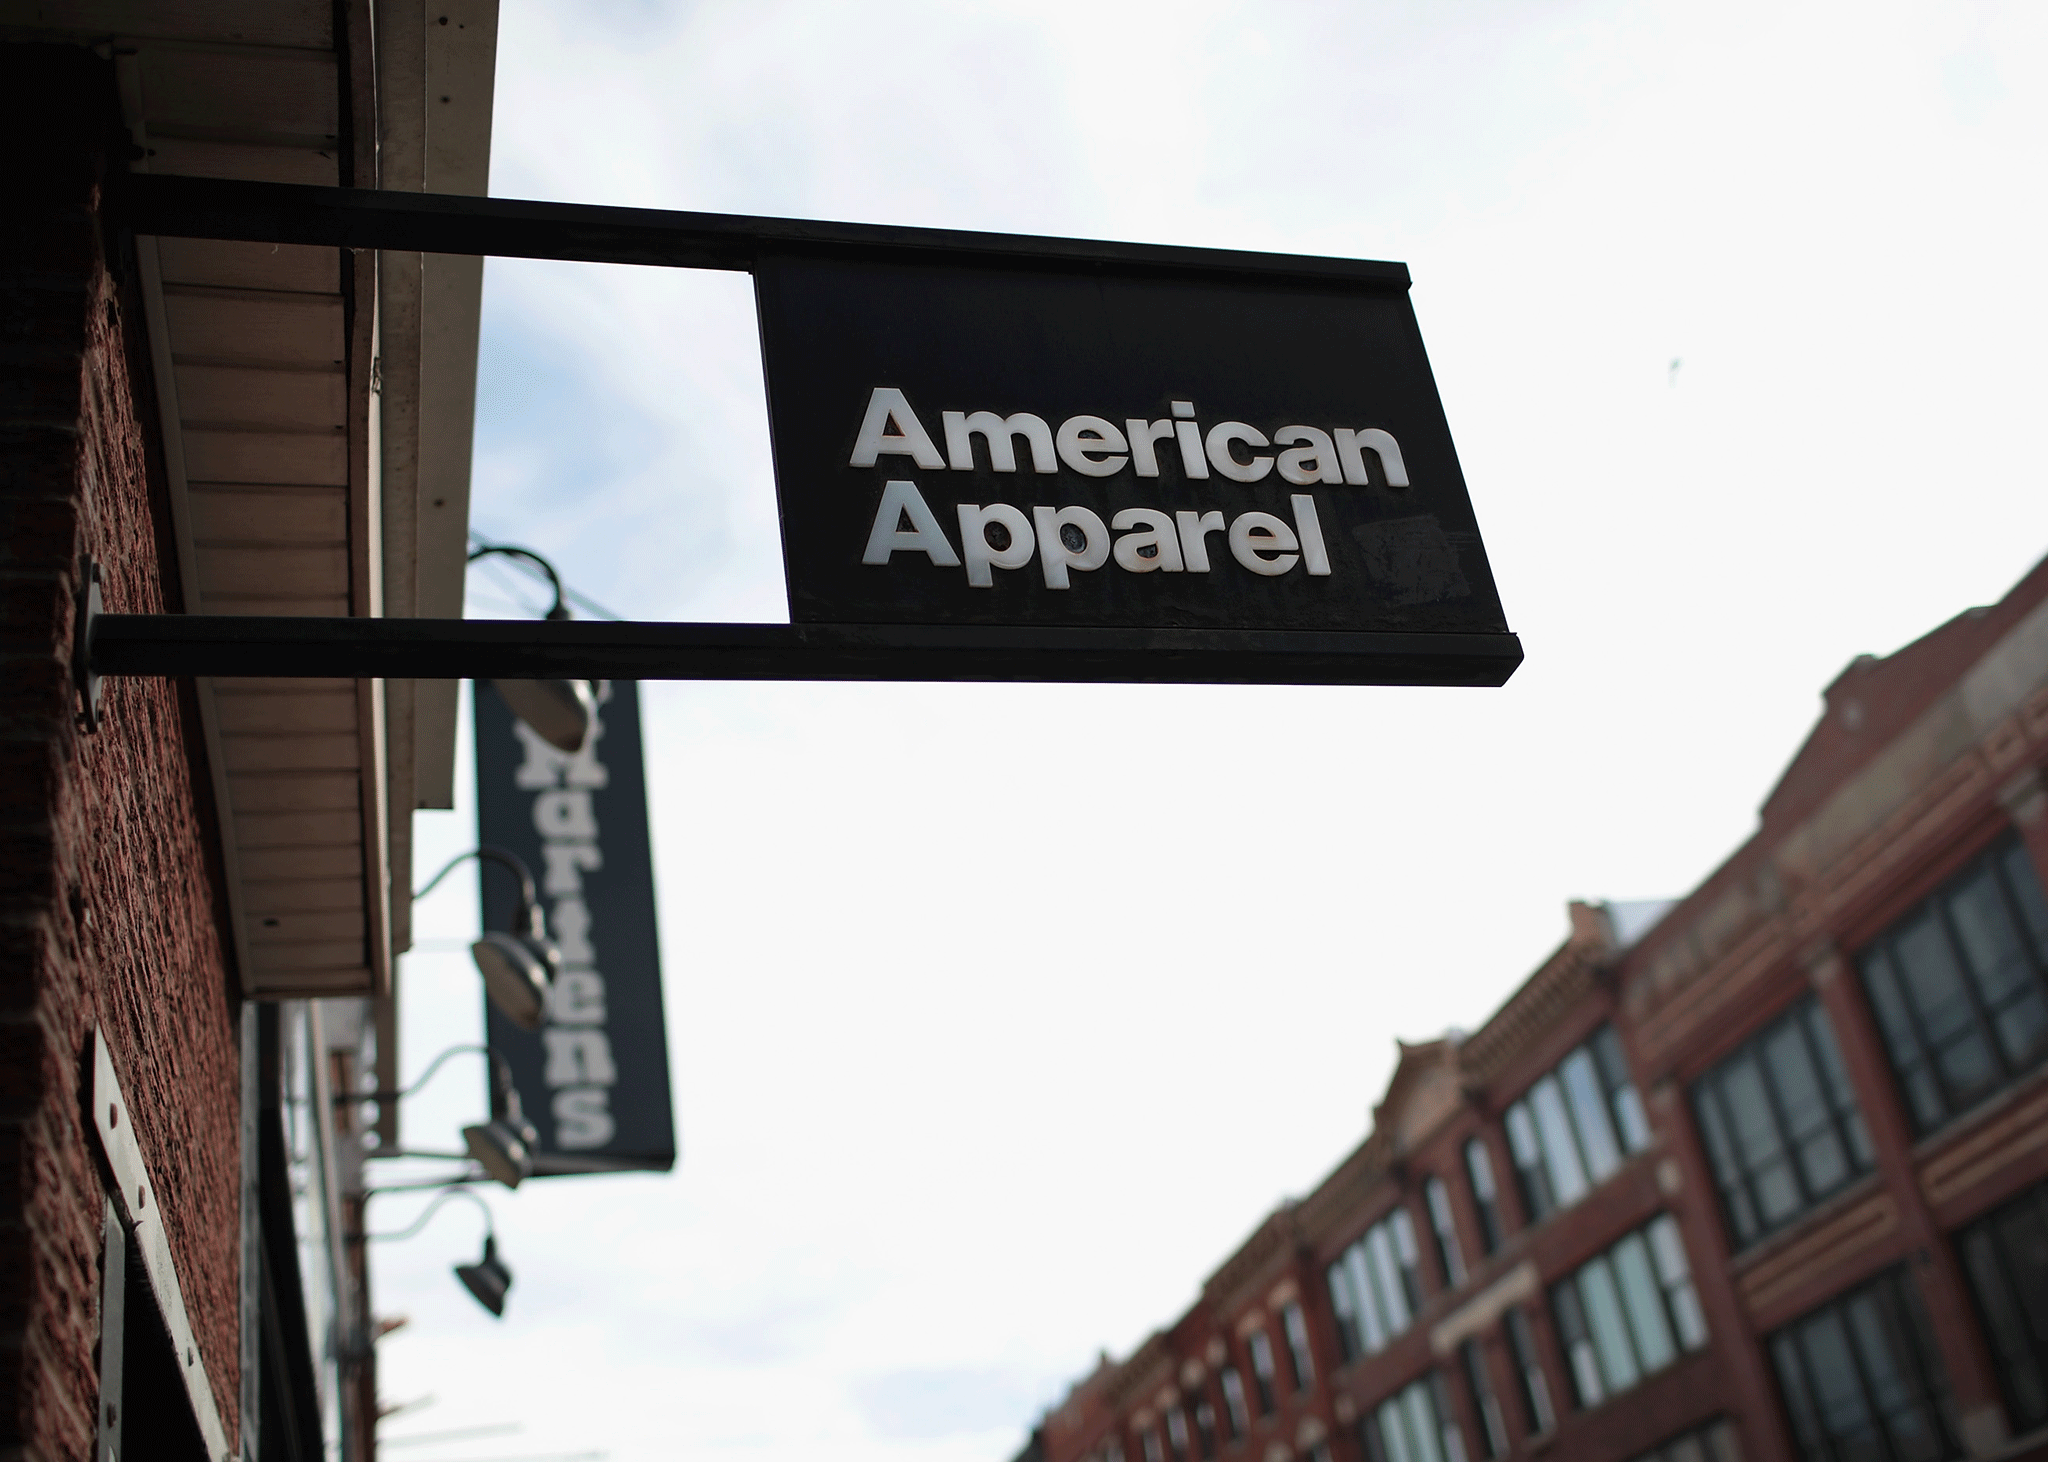 The company made all of its clothes in the US